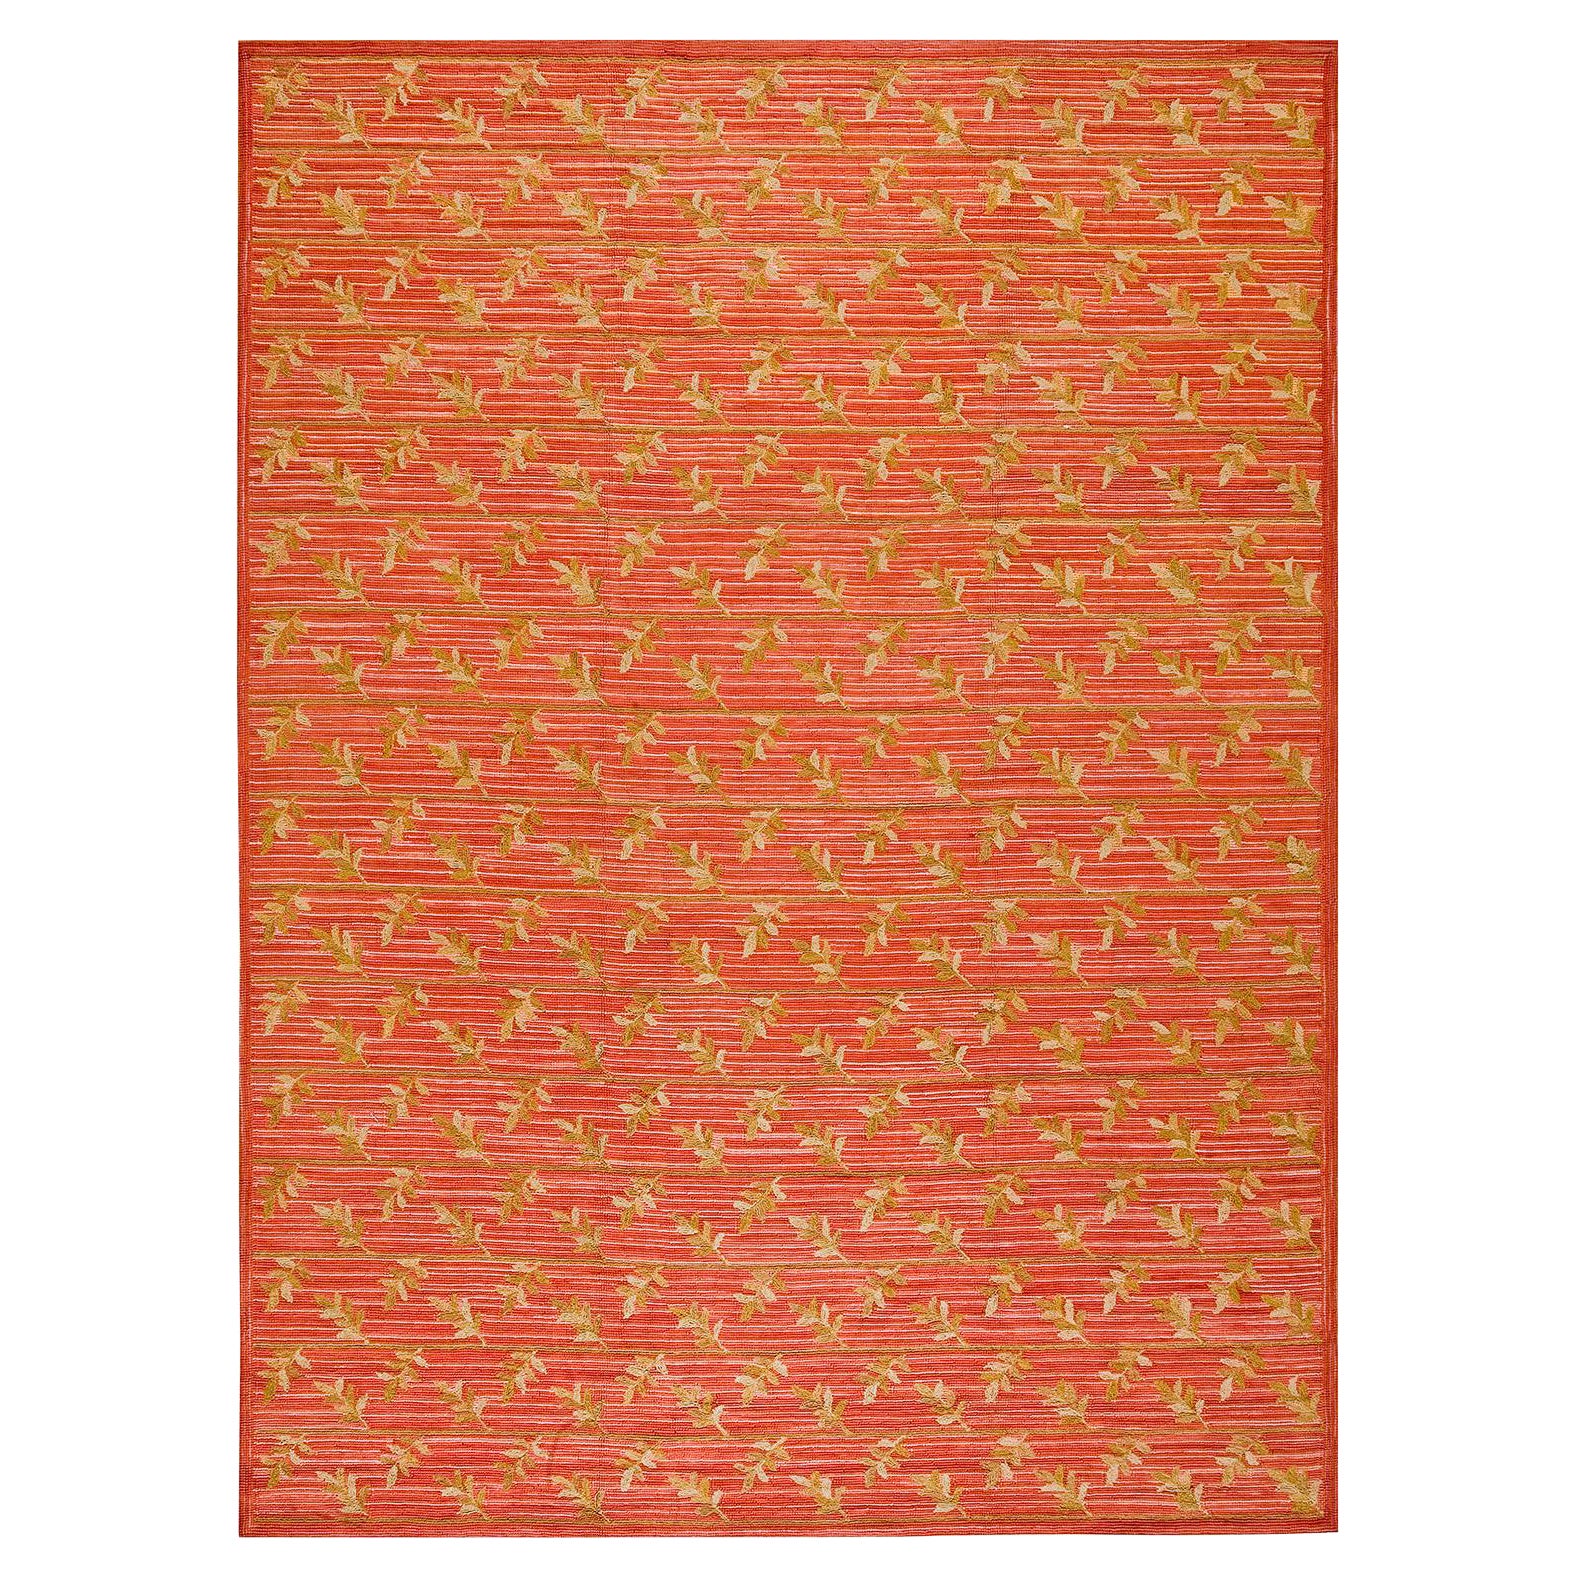 Contemporary American Hooked Rug (8' x 10' - 1244x 305) For Sale